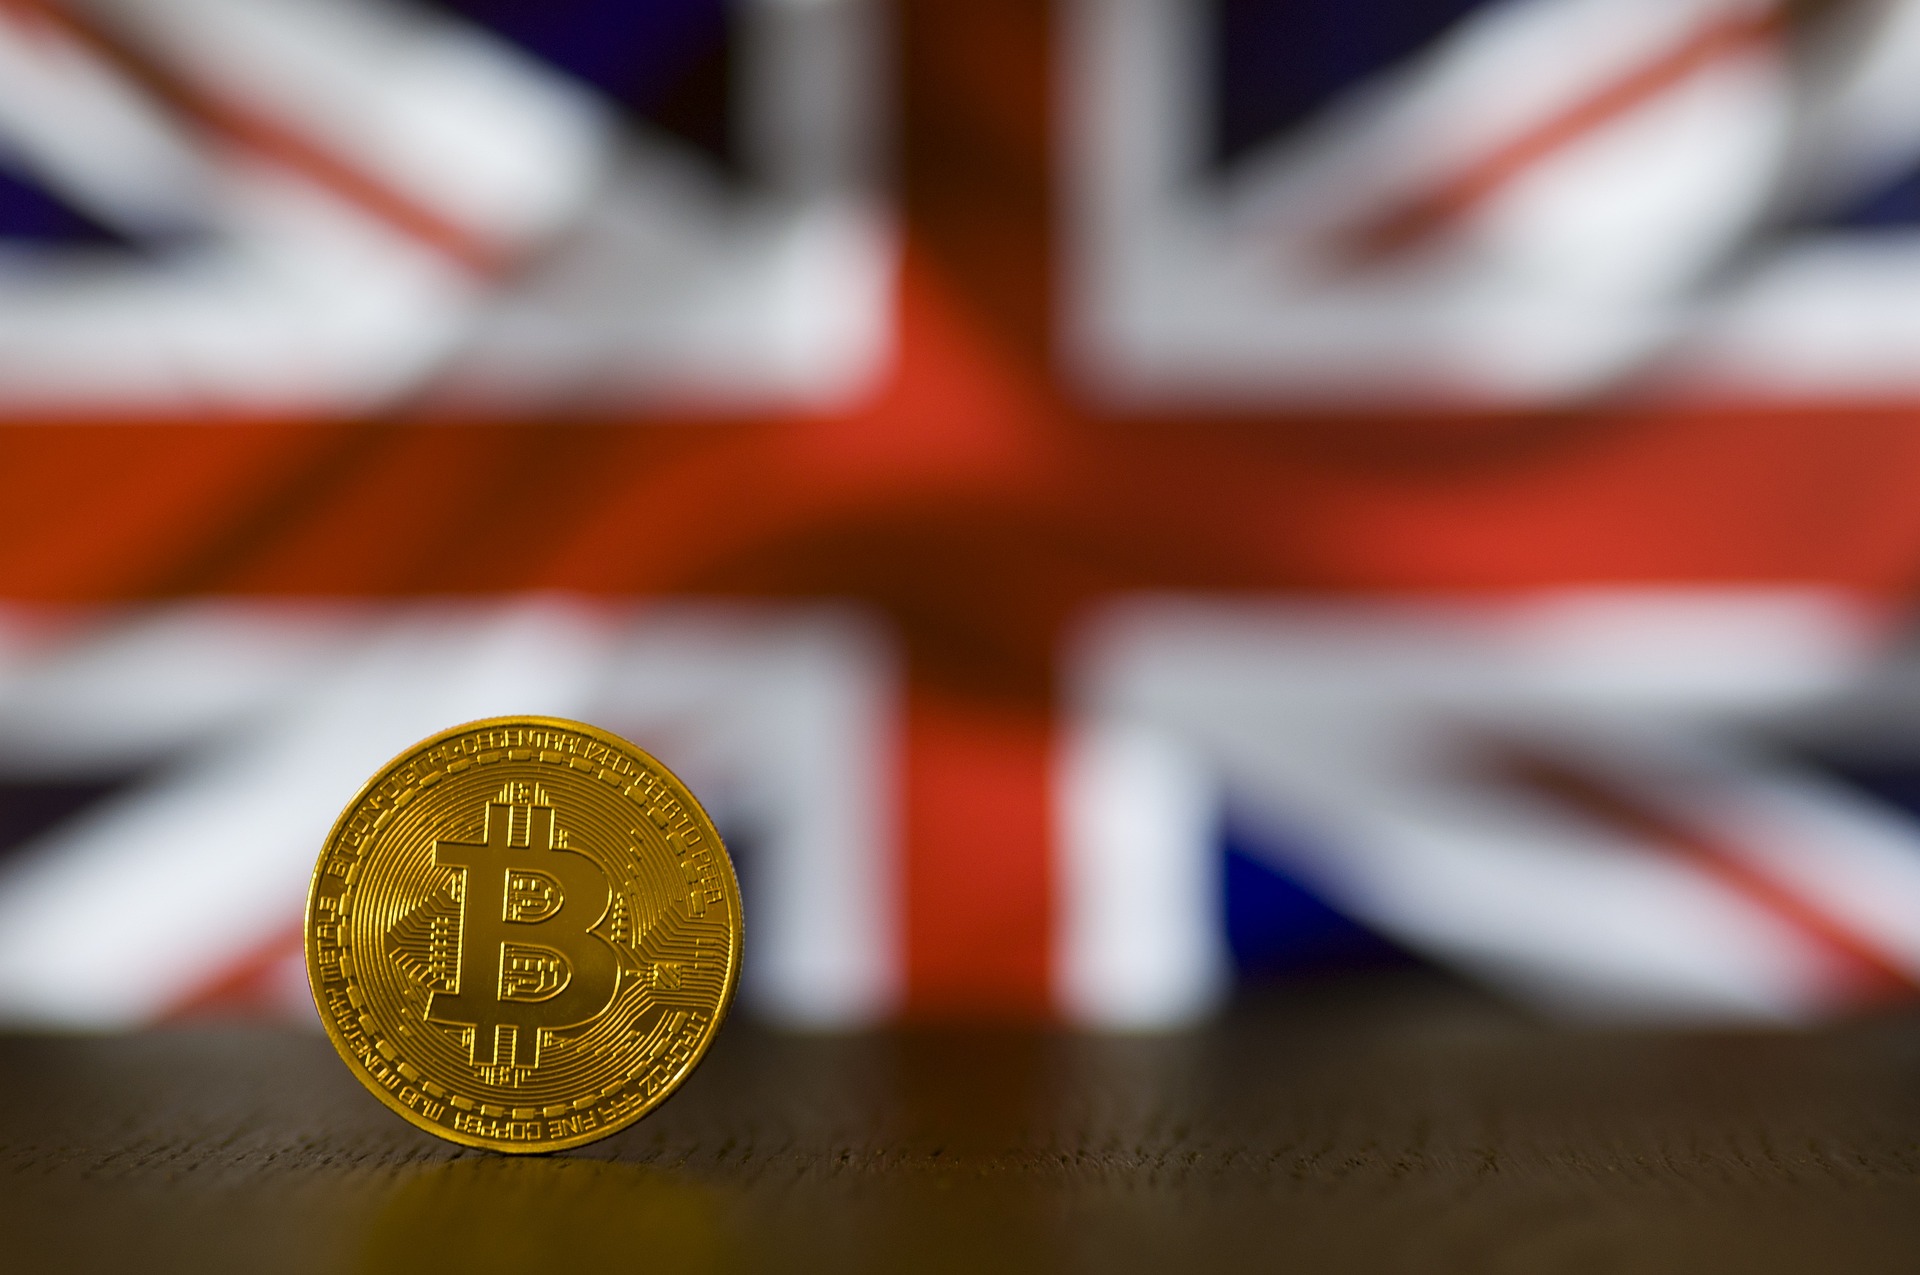 BritCoin, Digital Pound or Digital Sterling? Whatever you call it, are you prepared for it?